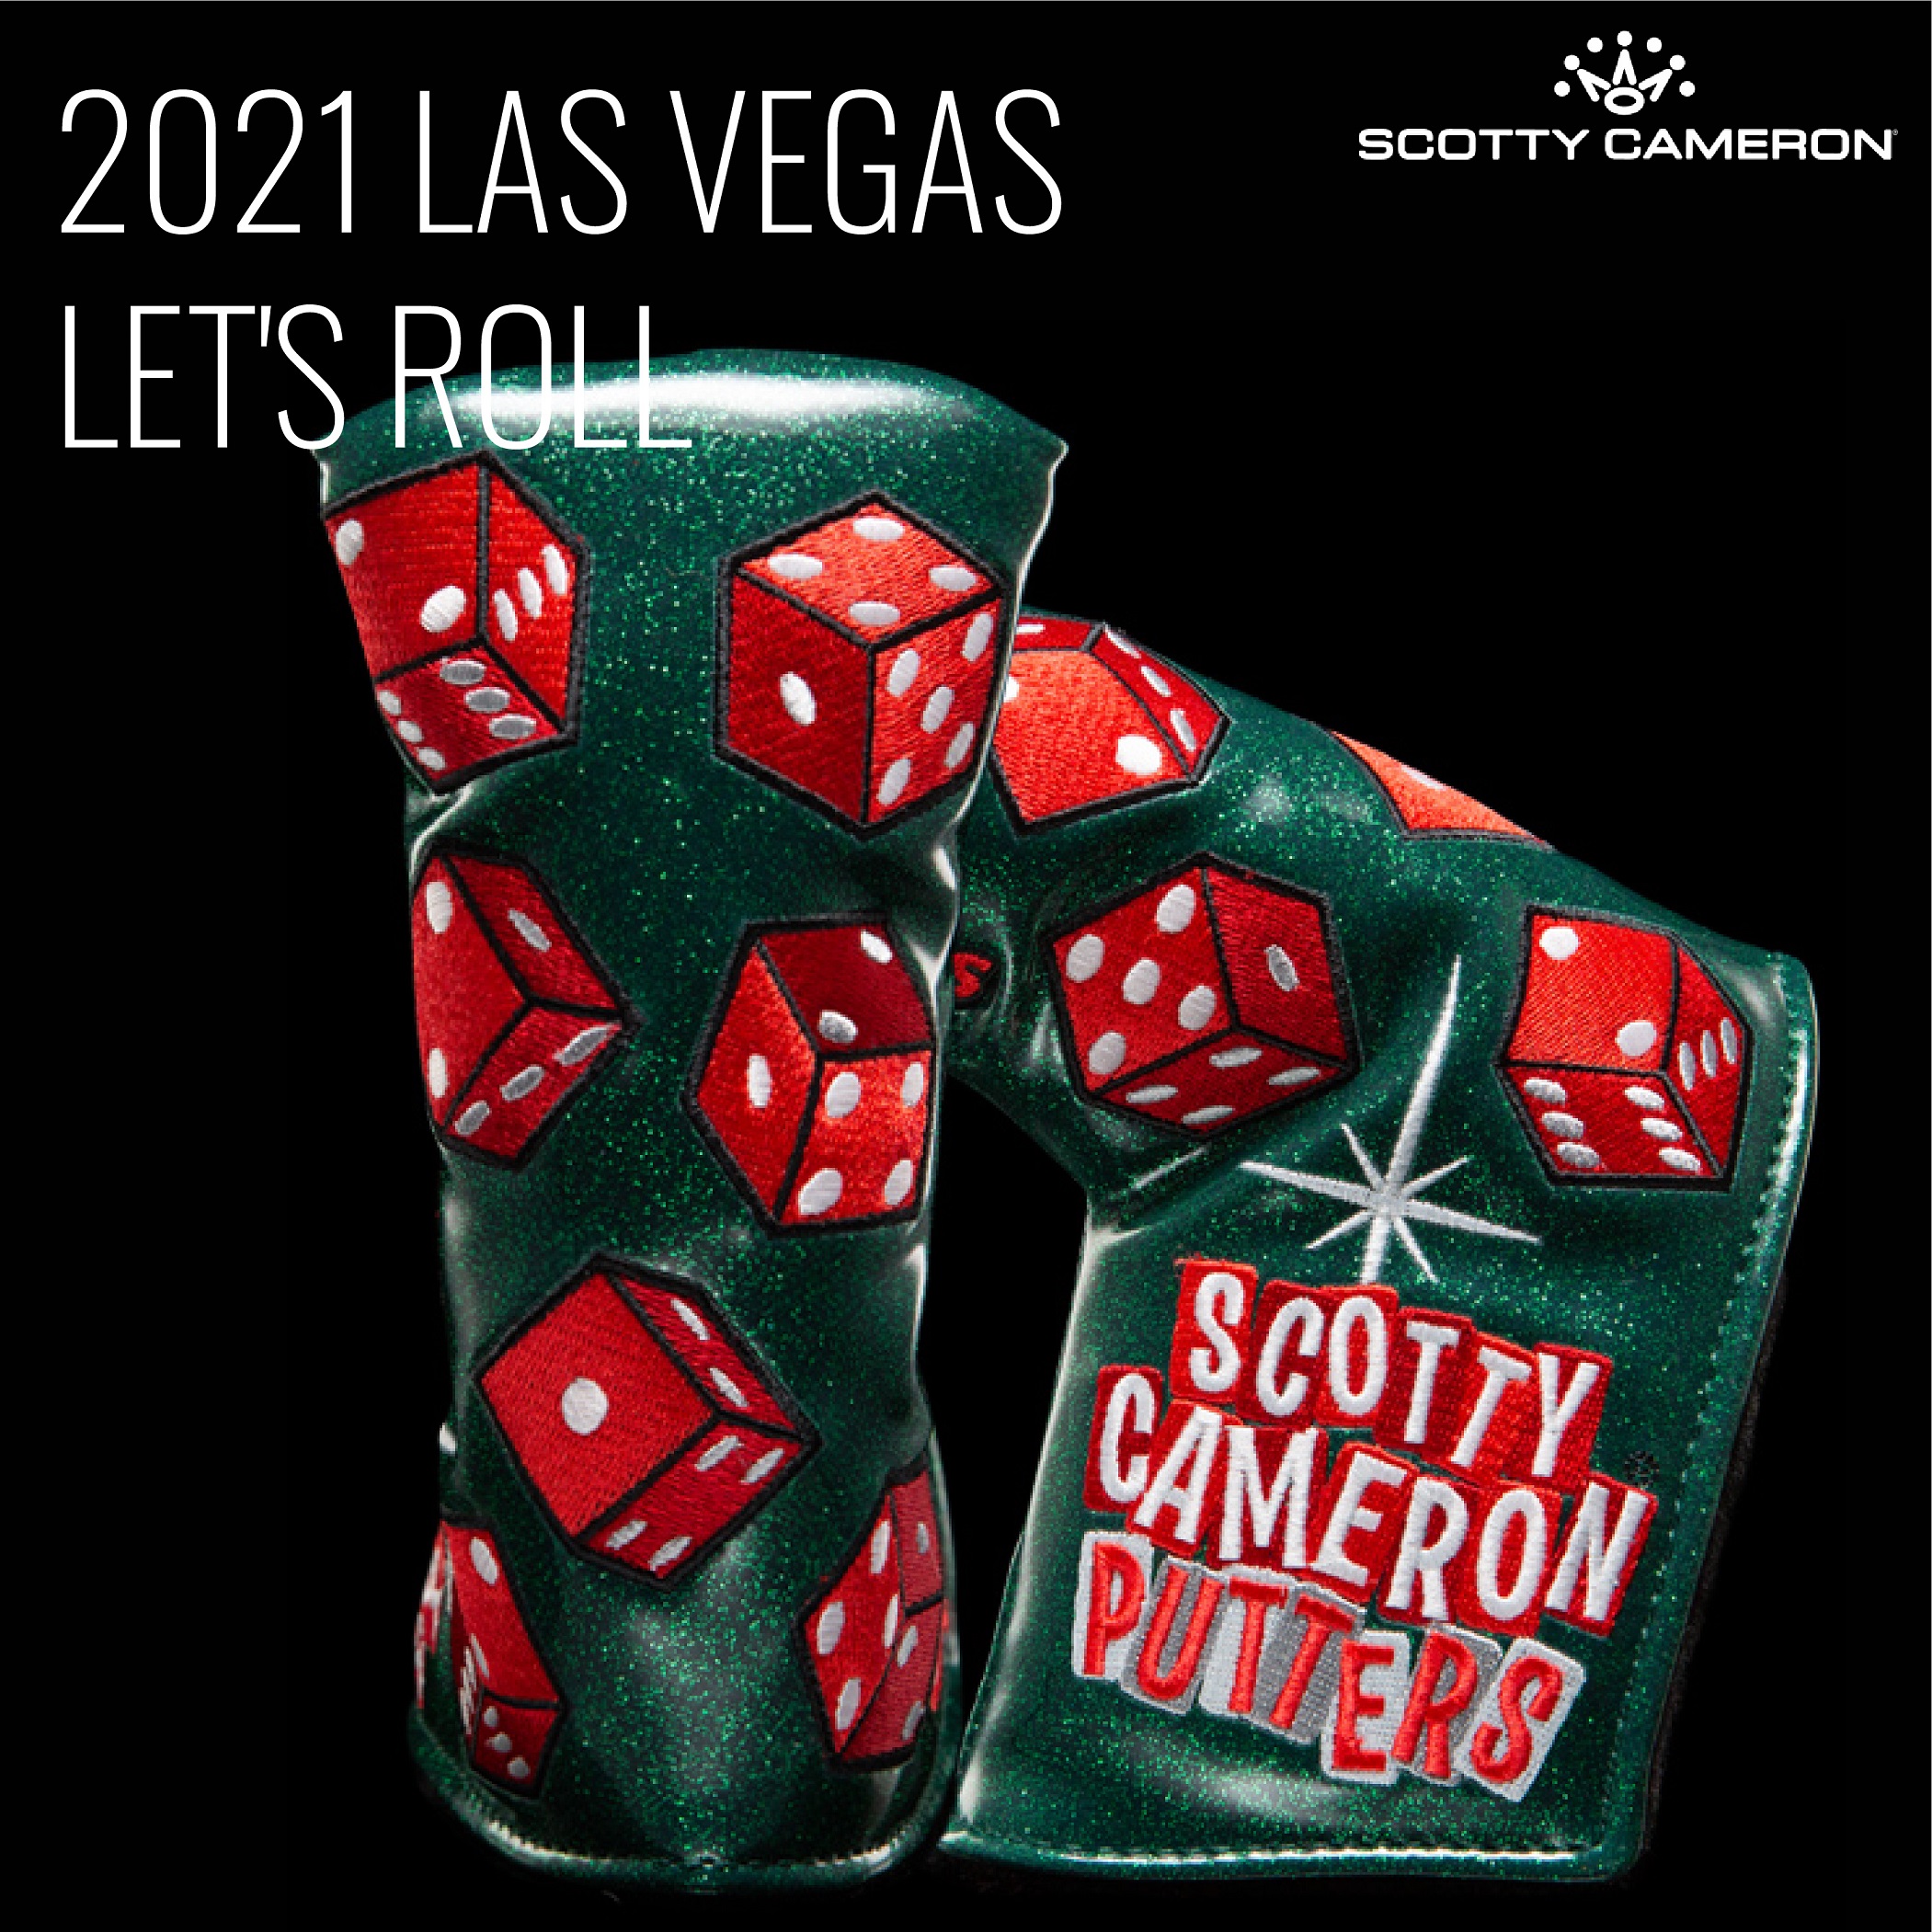 Scotty Cameron 2021 LAS VEGAS LET'S ROLL Limited